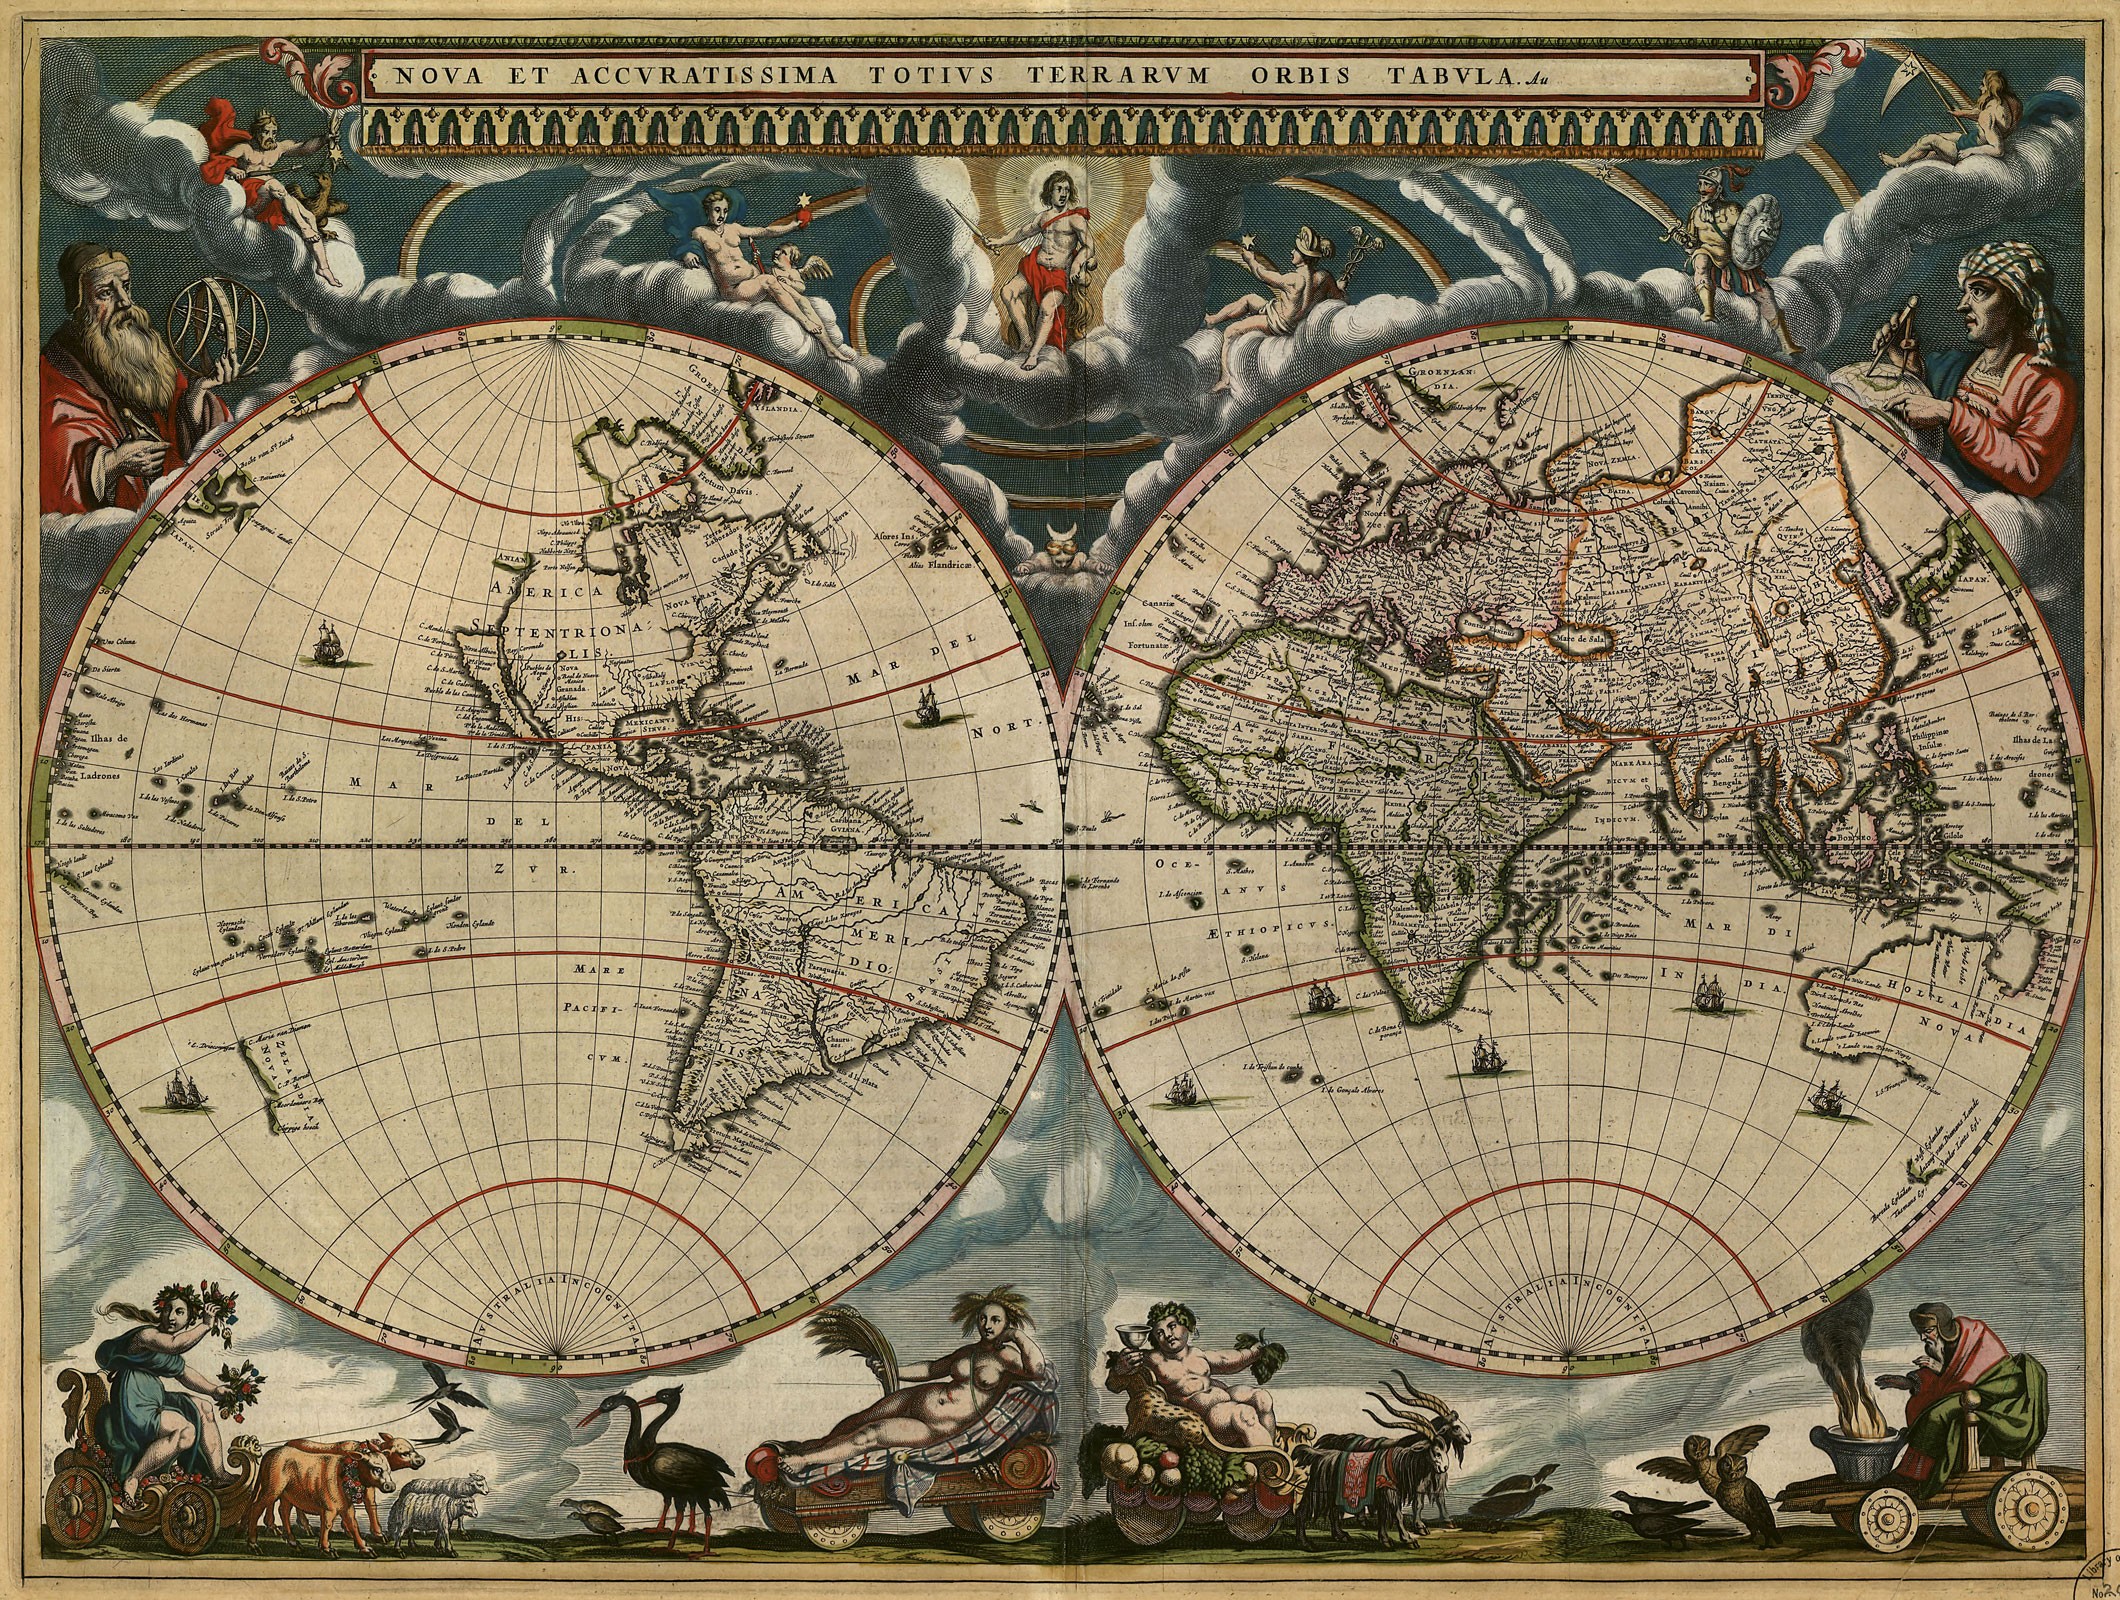 New and Most Accurate World Map, c.1662, Printed on Parchment